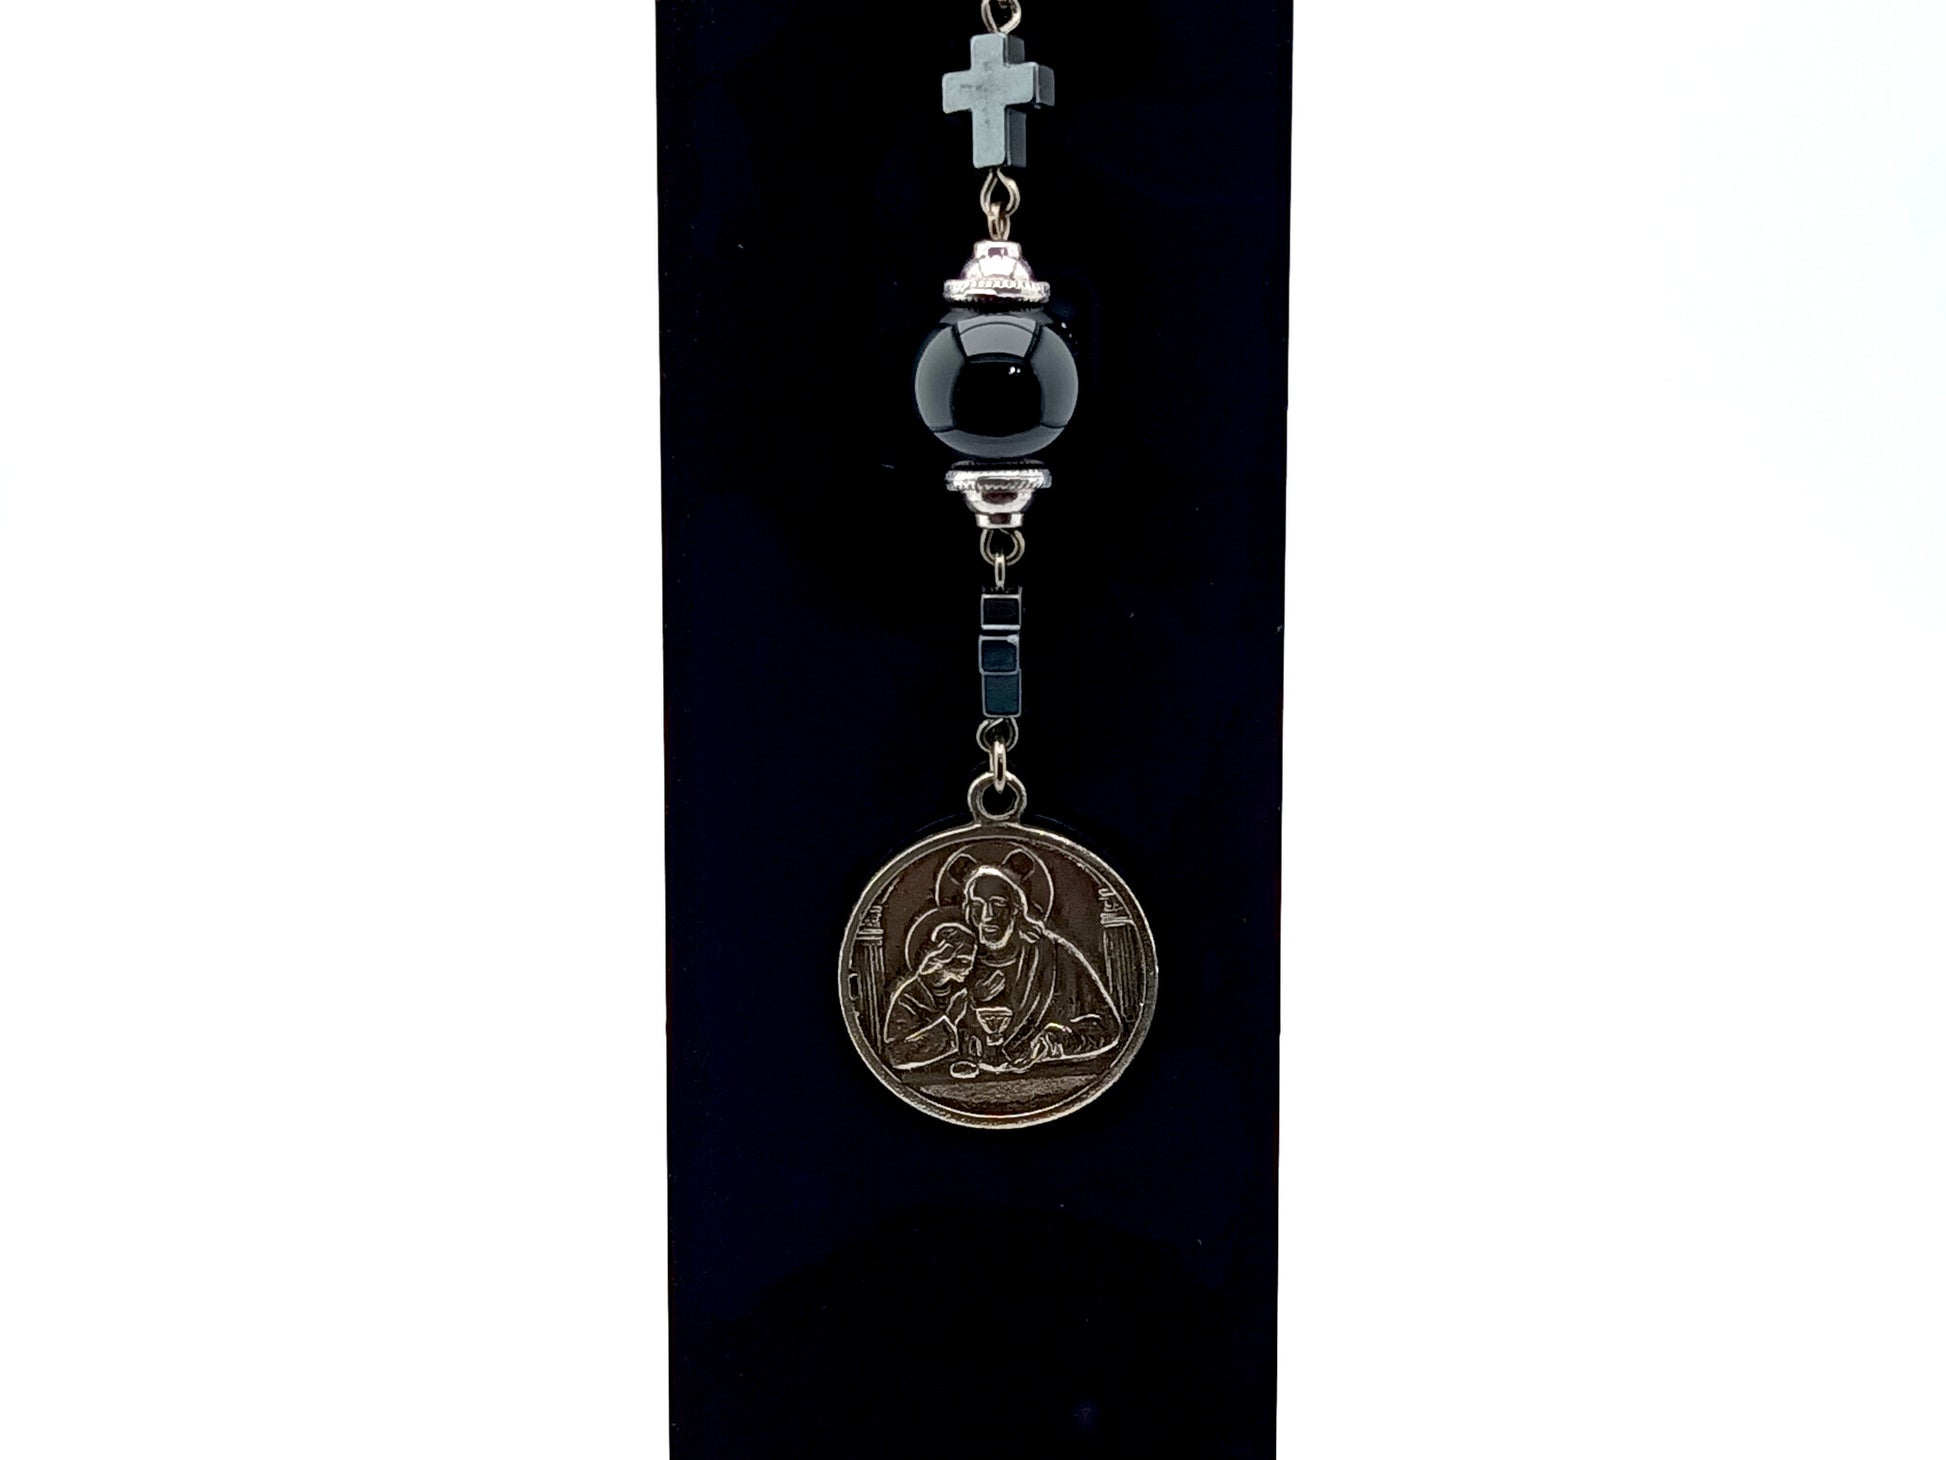 Blessed Sacrament unique rosary beads purse clip key chain with onyx and hematite cross beads, indulgence medal and loop ring.